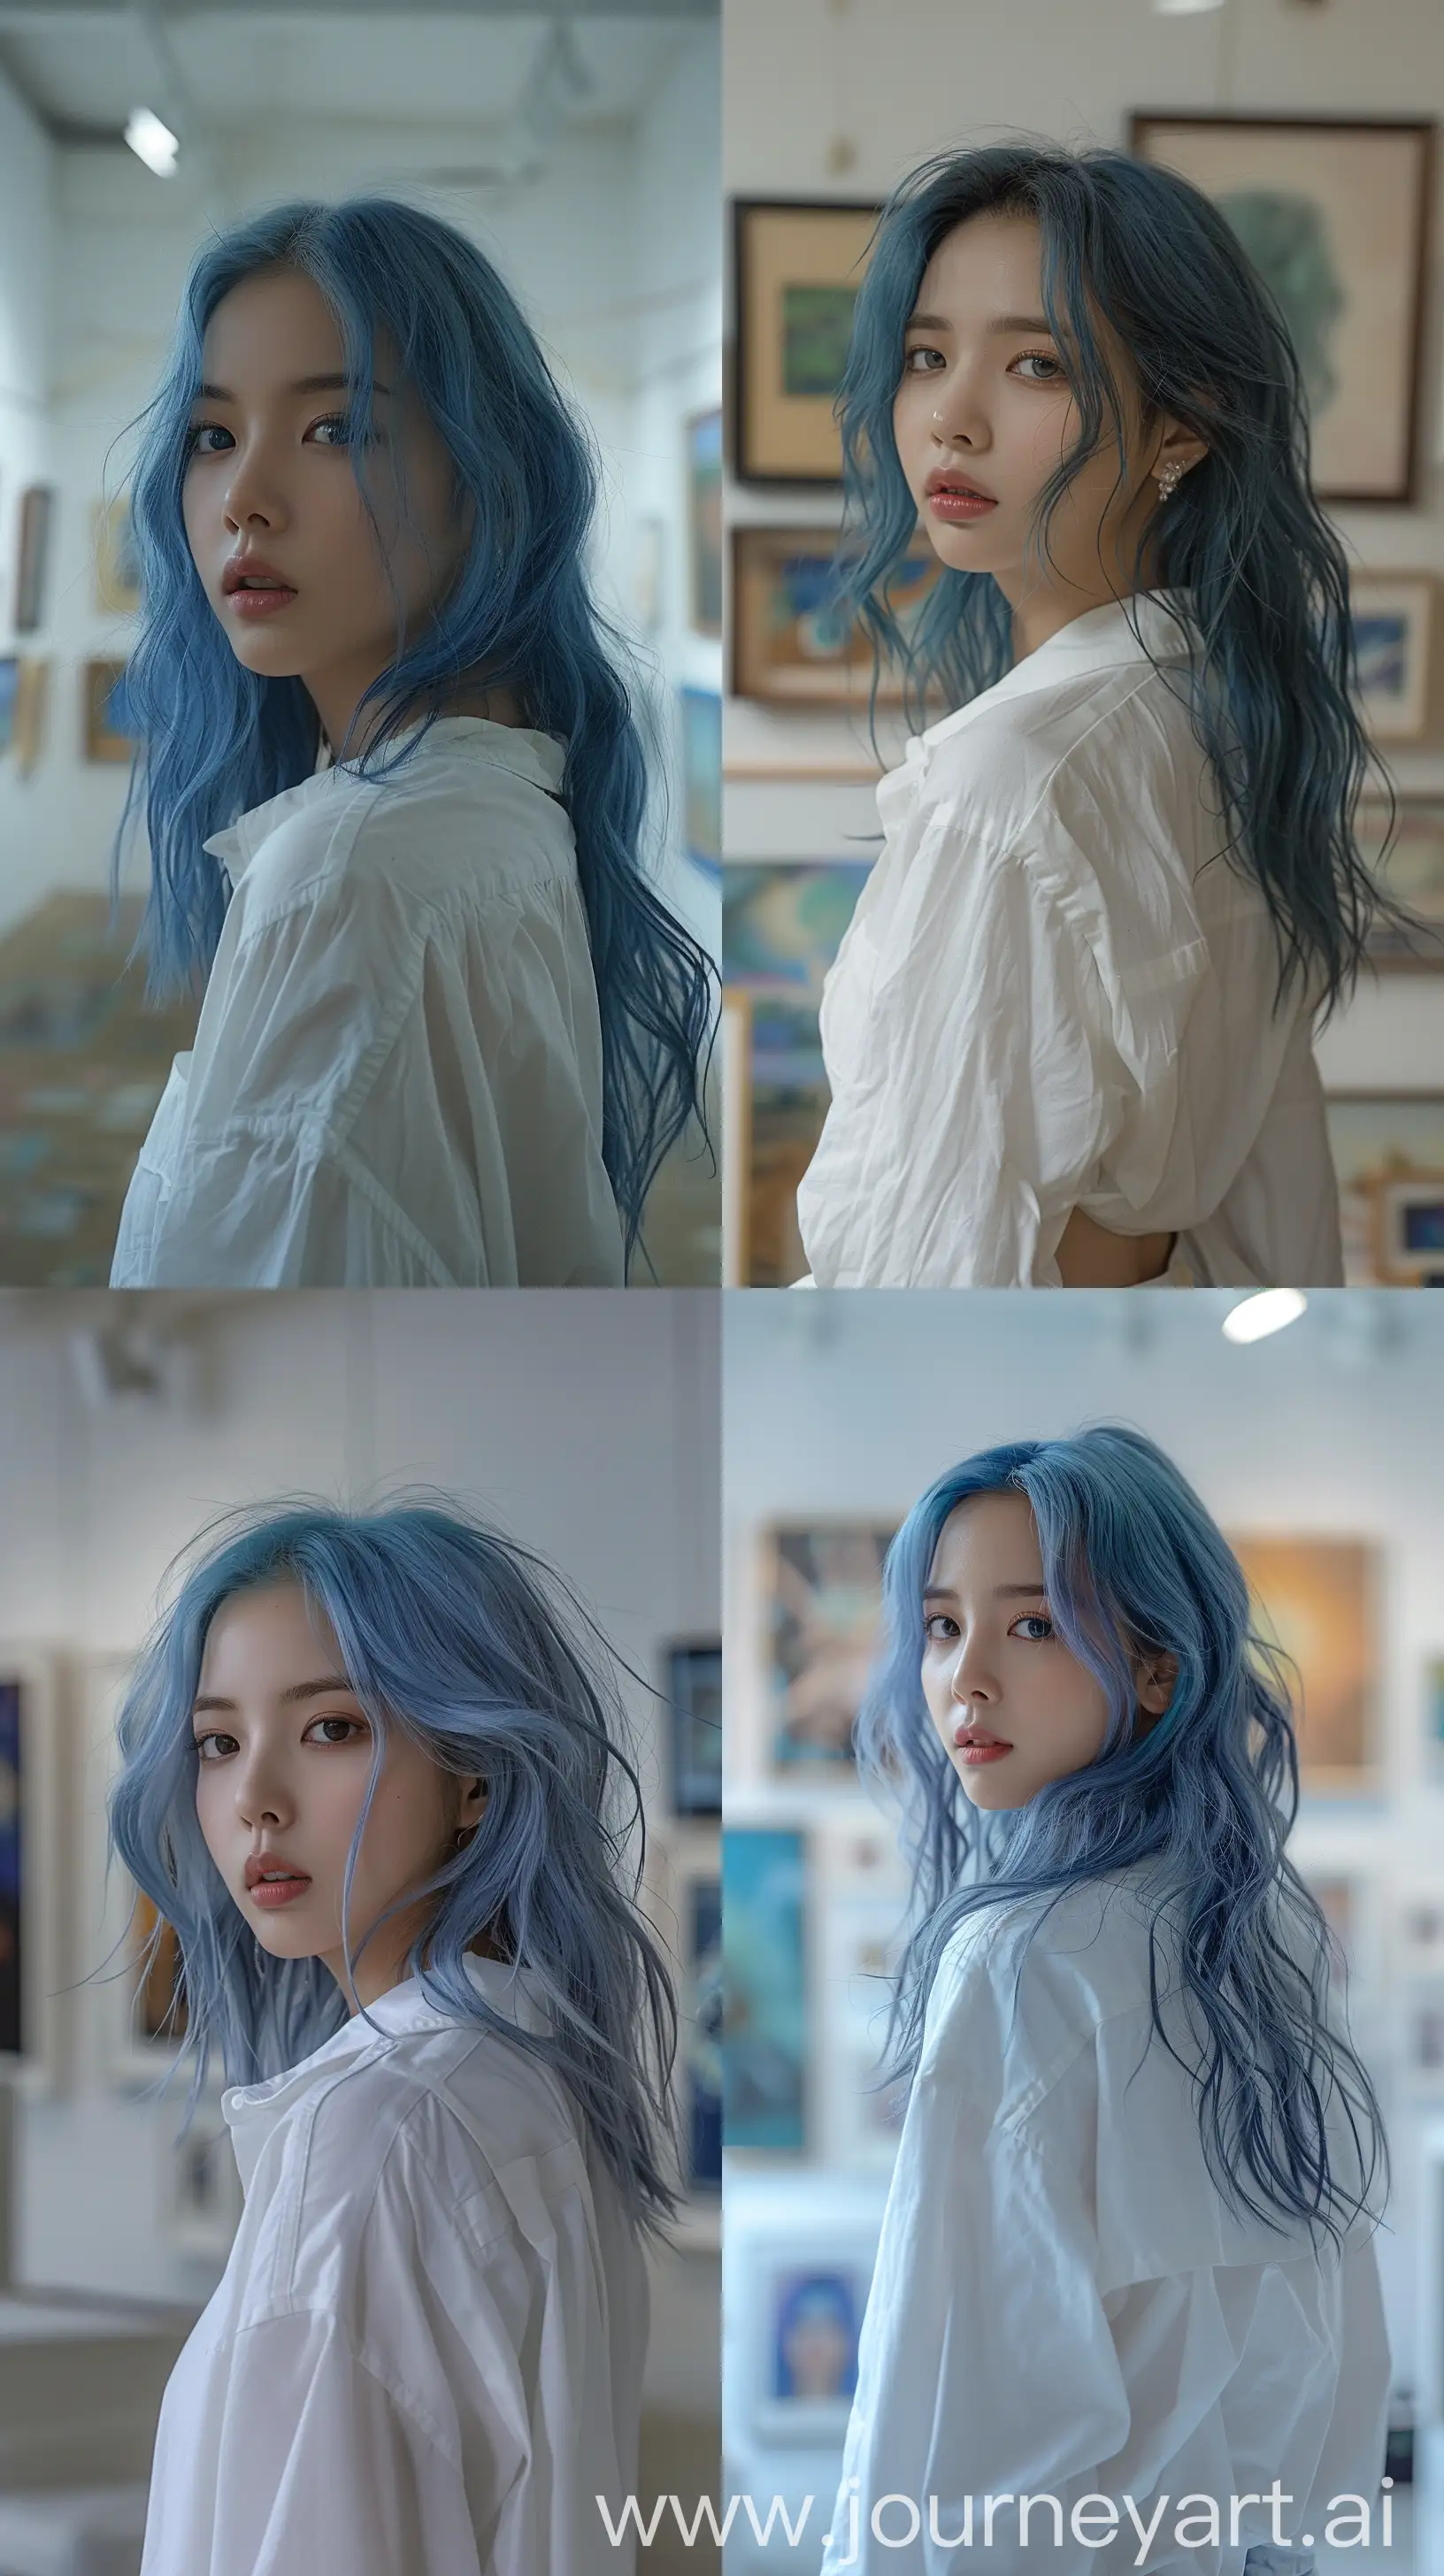 Blackpinks-Jennie-in-White-Shirt-with-Blue-Wolfcut-Hair-in-Art-Gallery